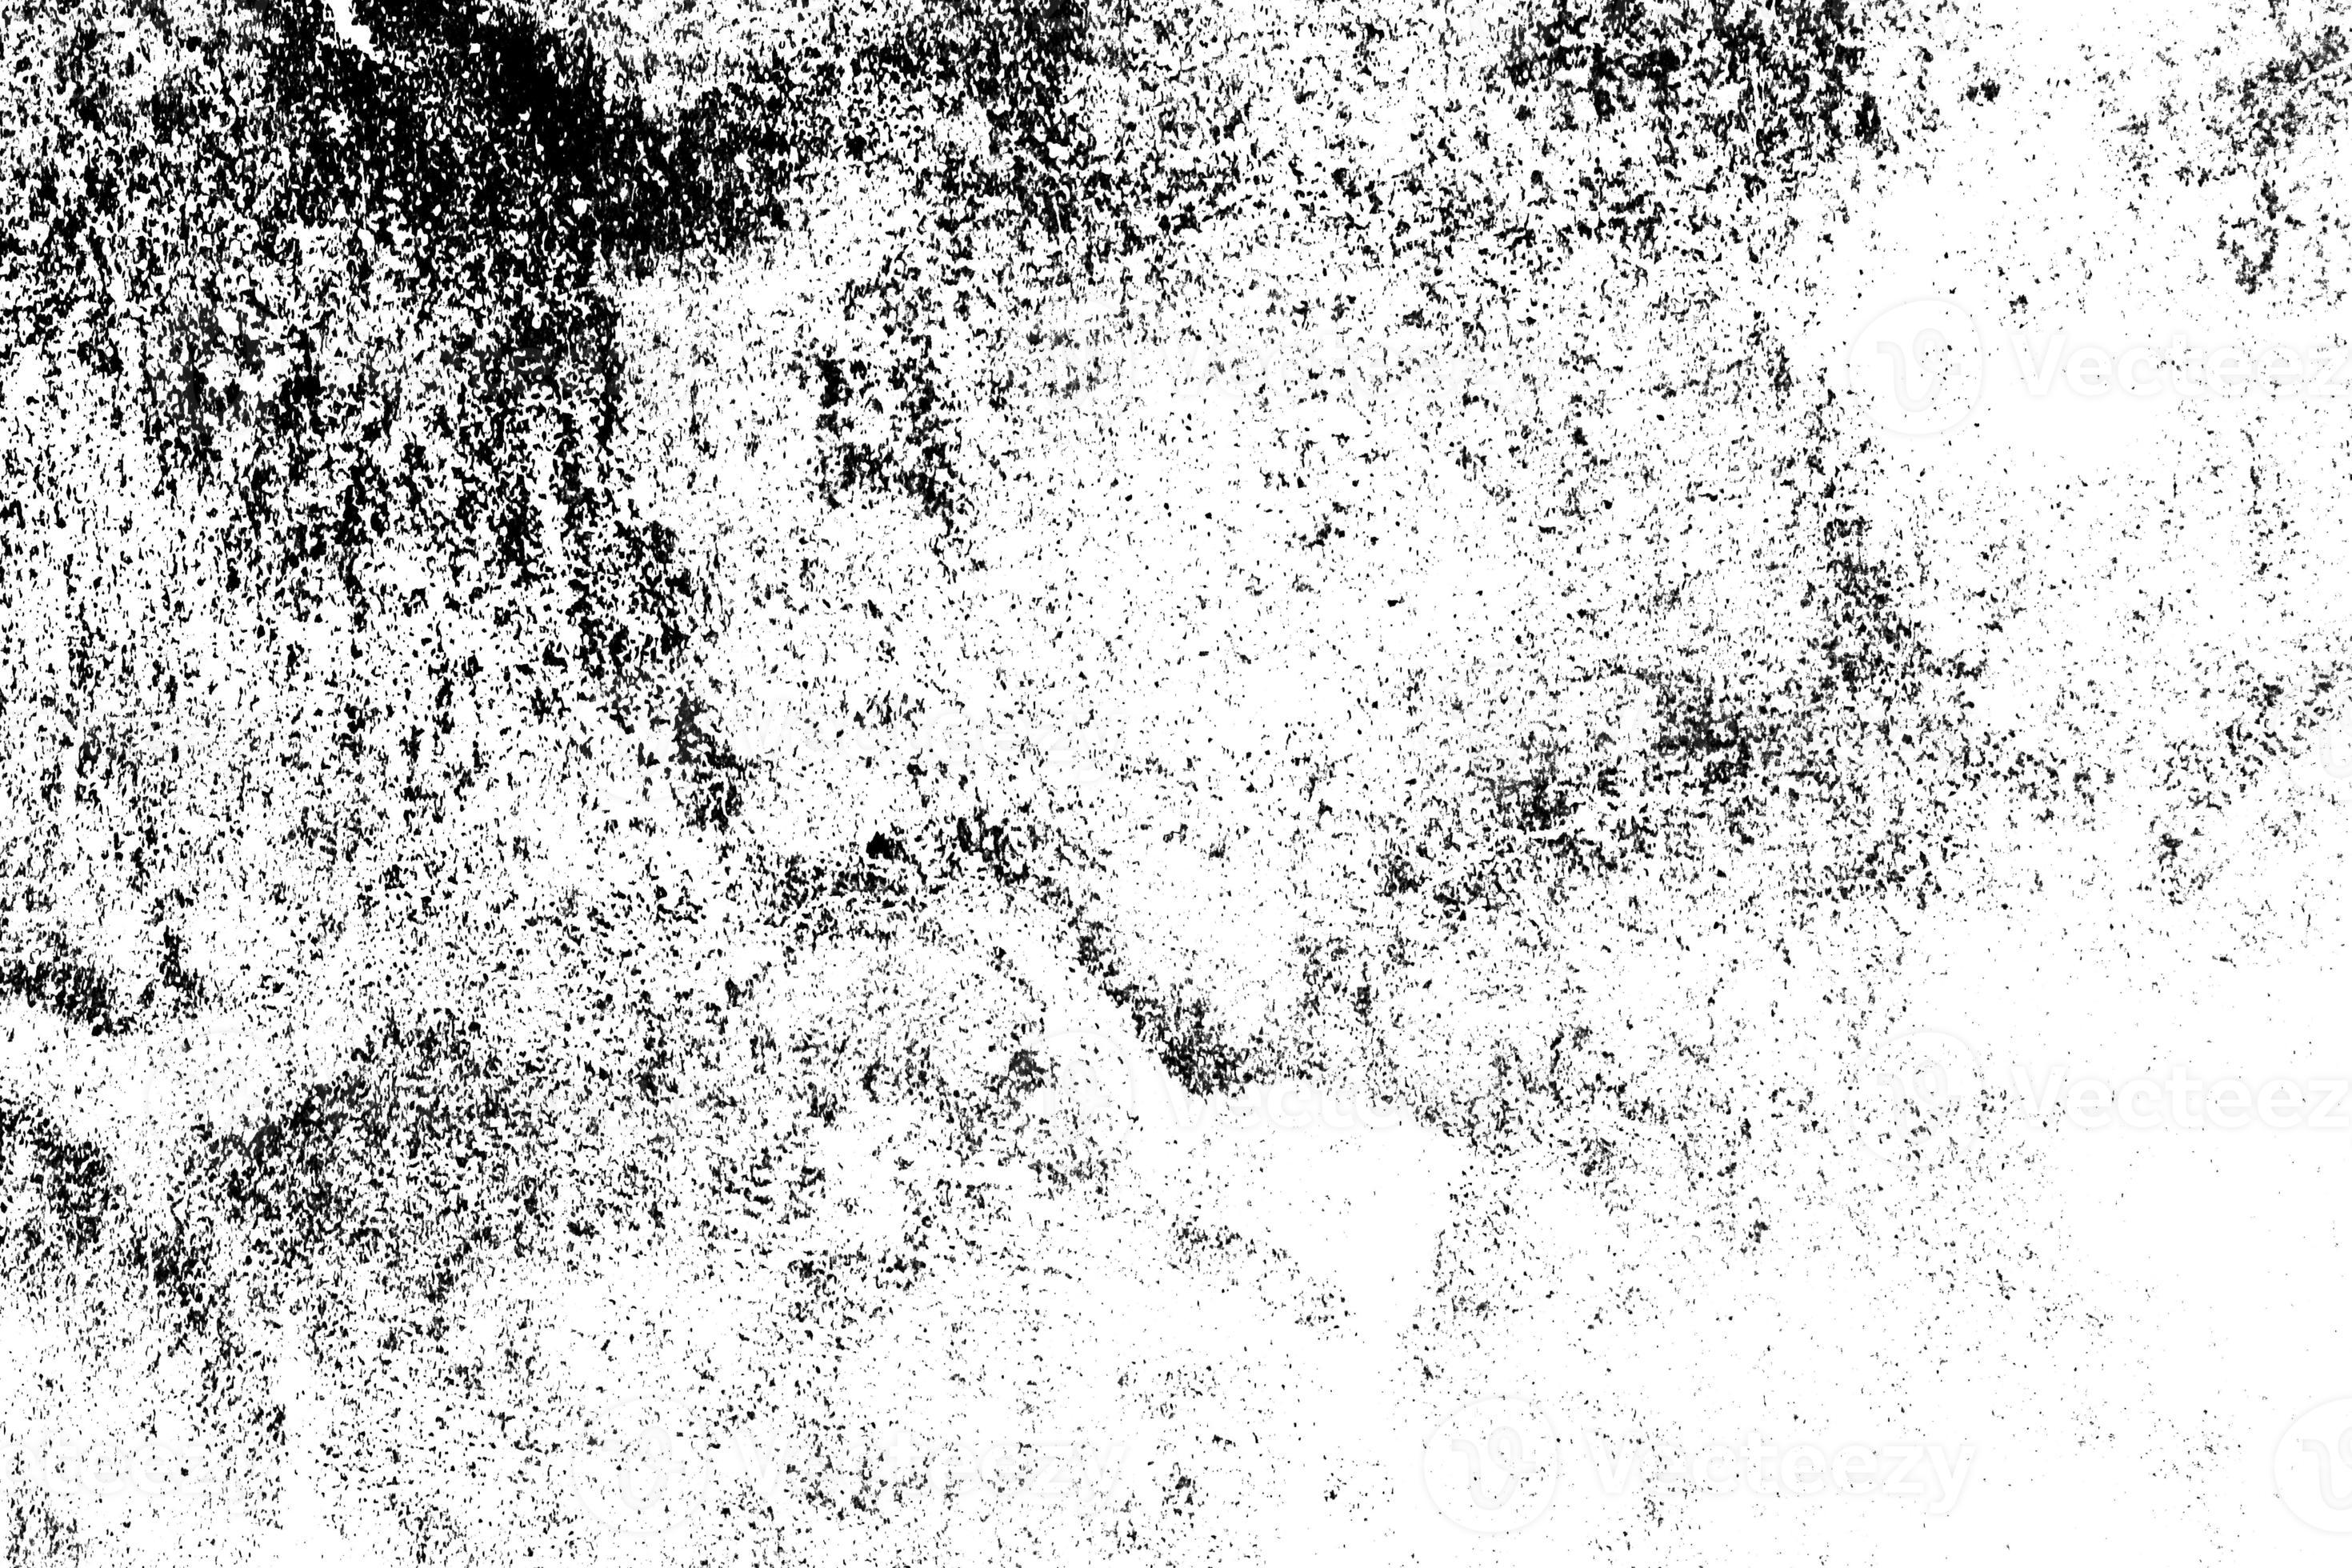 Black grunge dust and scratches distressed design. Dirty grunge texture  photo editor layer. Black and white overlay grunge abstract background.  10329029 Stock Photo at Vecteezy